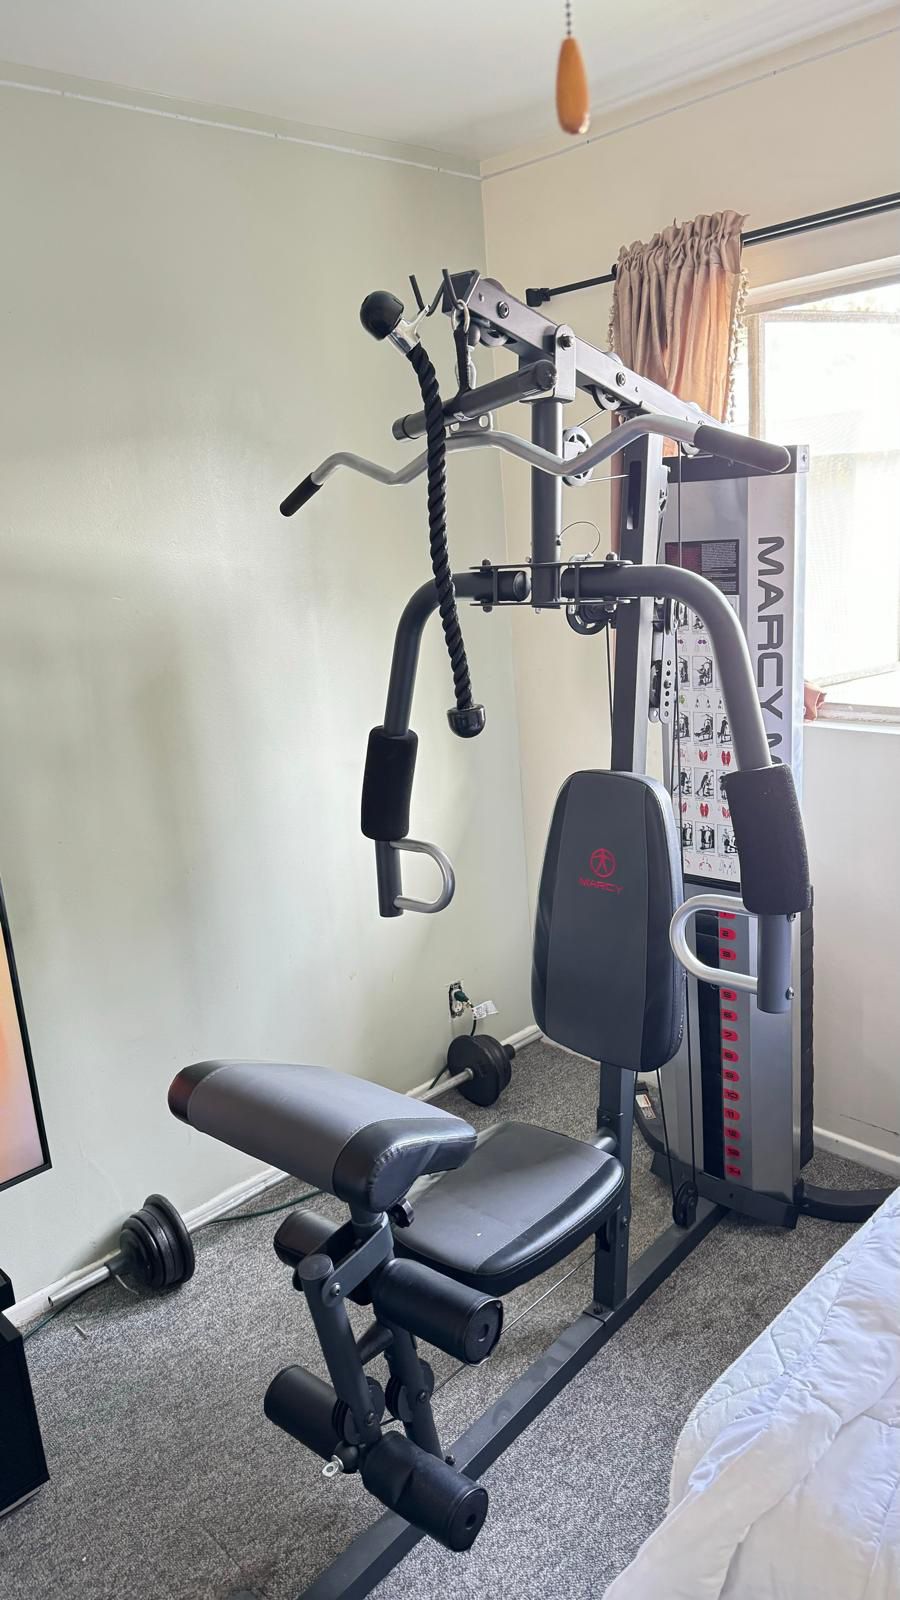 Exercise Machine In Good Condition 